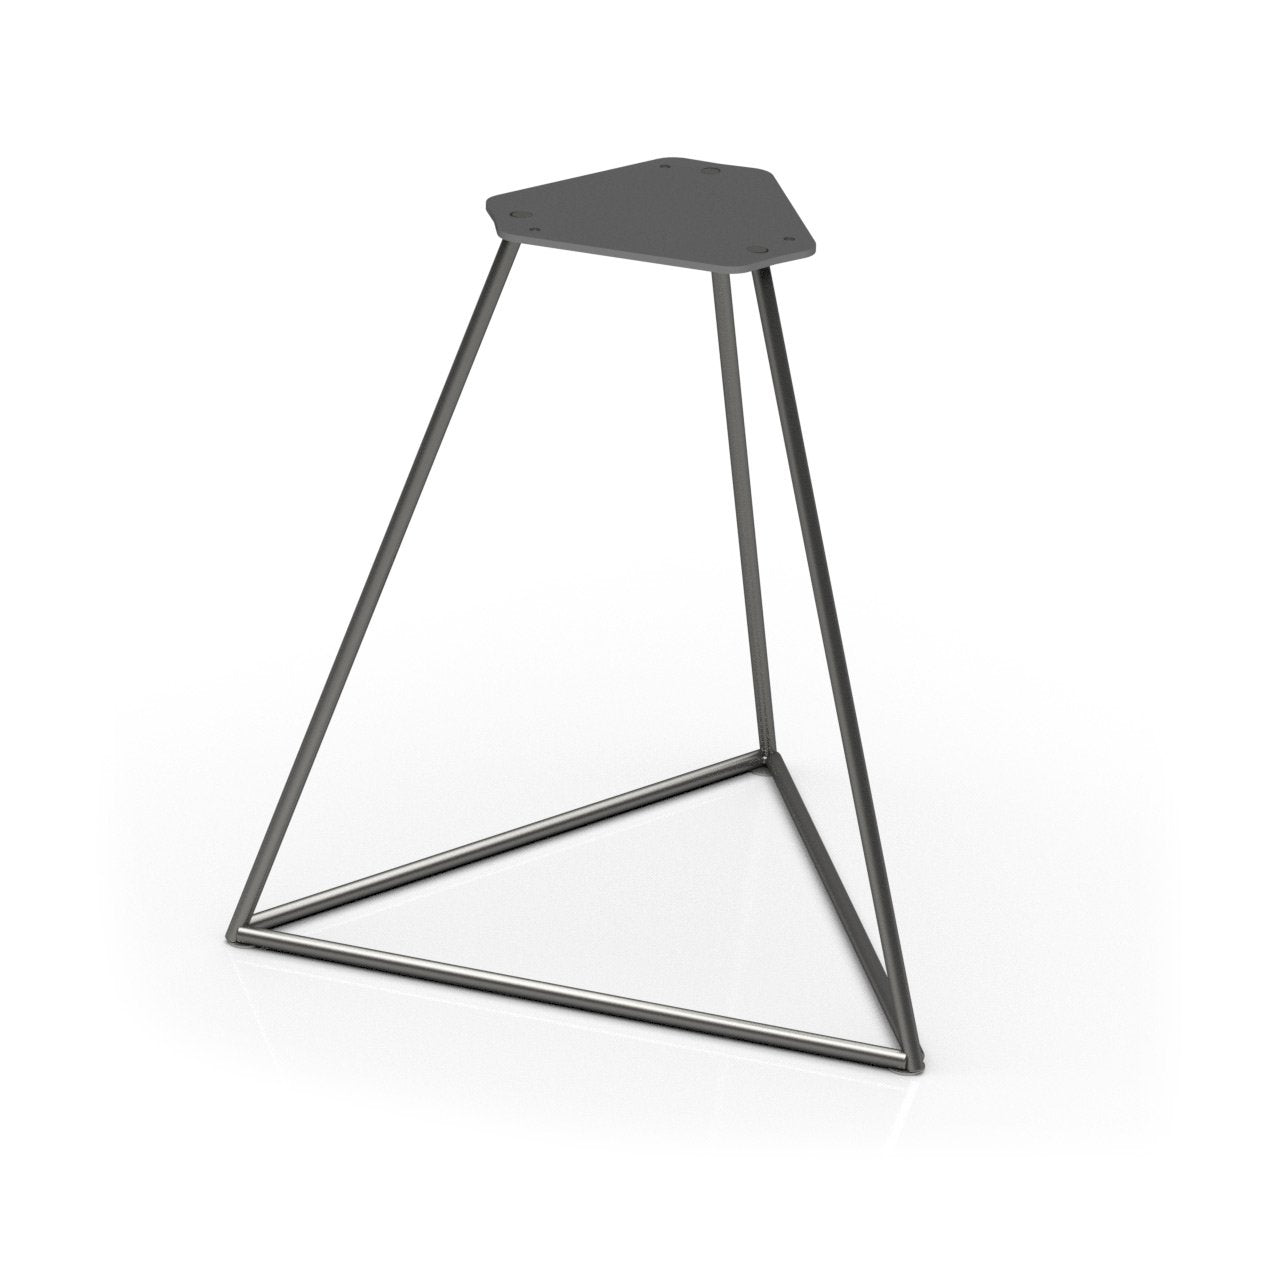 Old Barn Prism Stool - Round